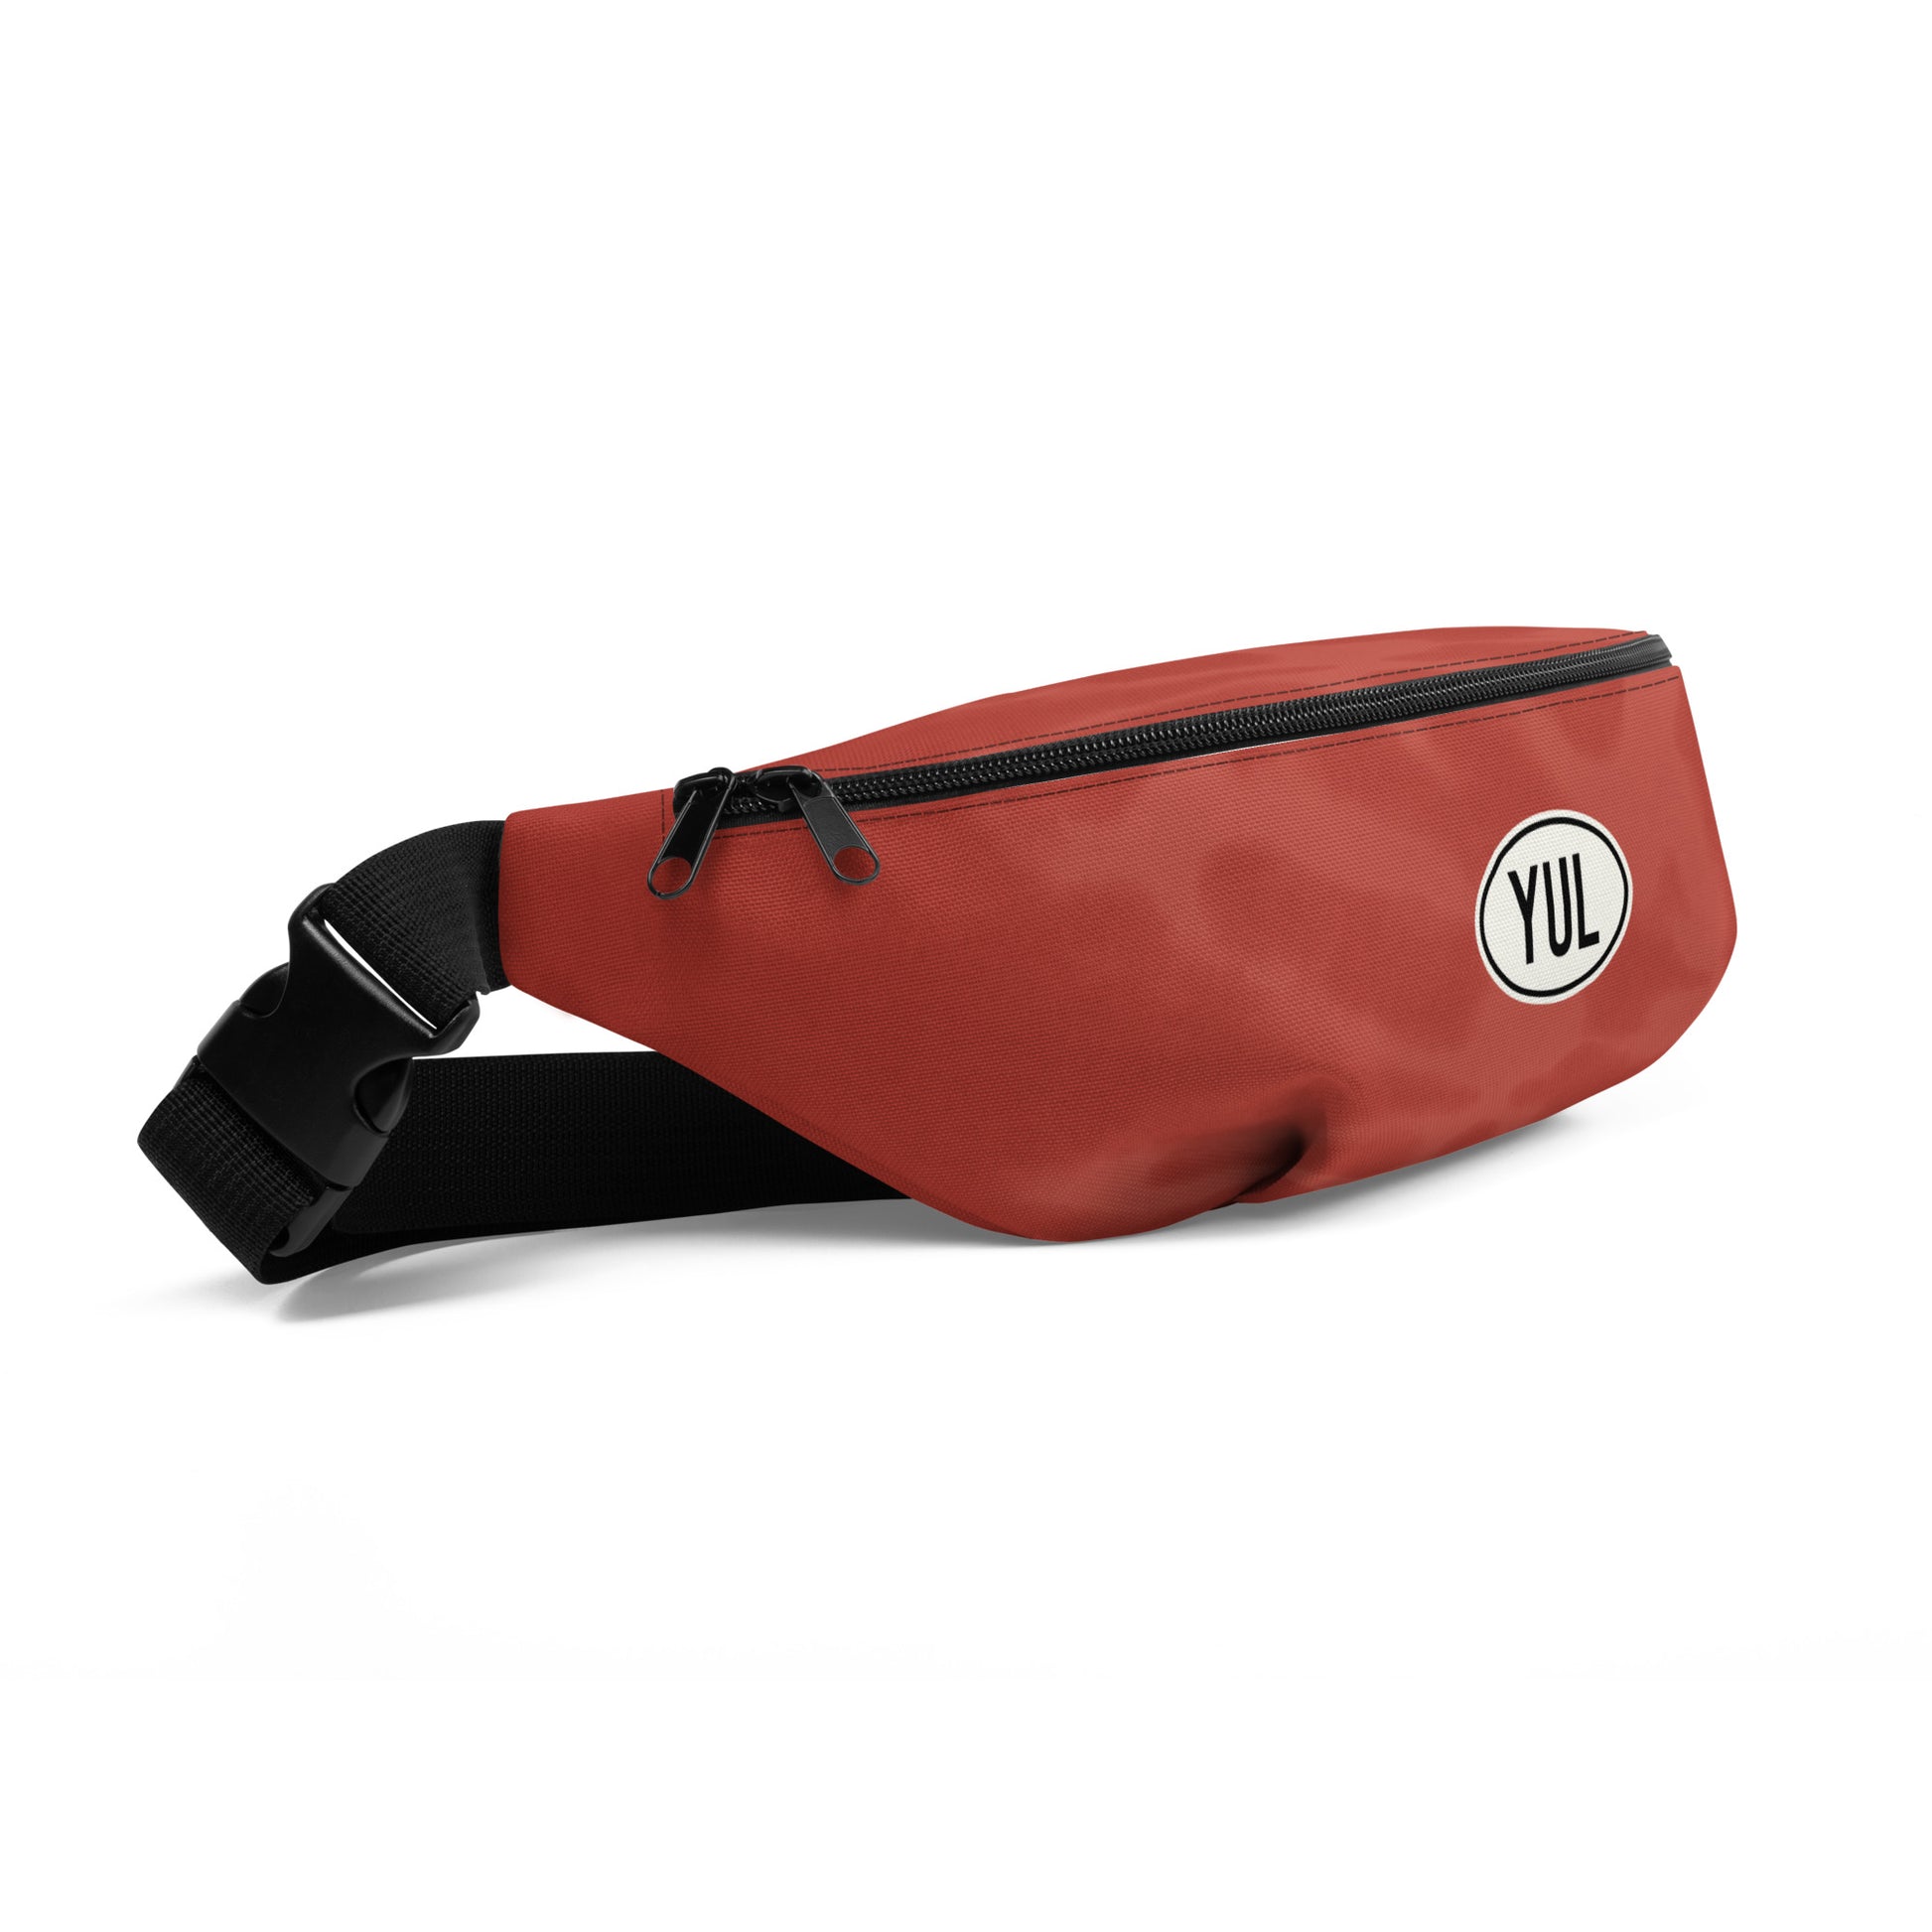 Travel Gift Fanny Pack - Red Tie-Dye • YUL Montreal • YHM Designs - Image 07